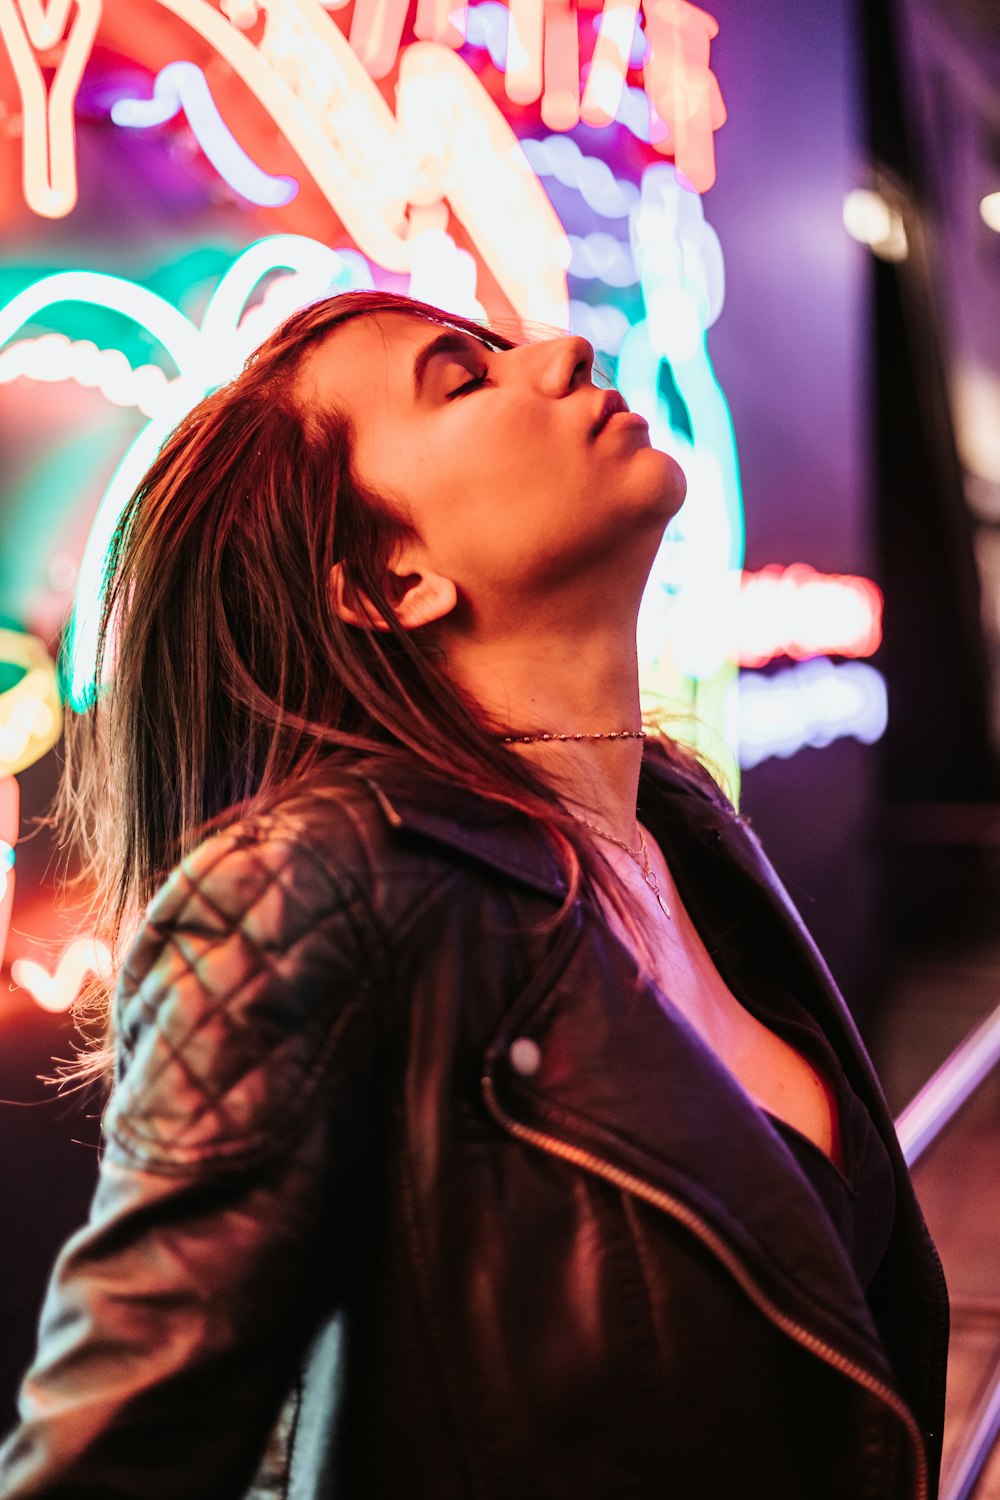 woman wearing black leather jacket standing near neon signage